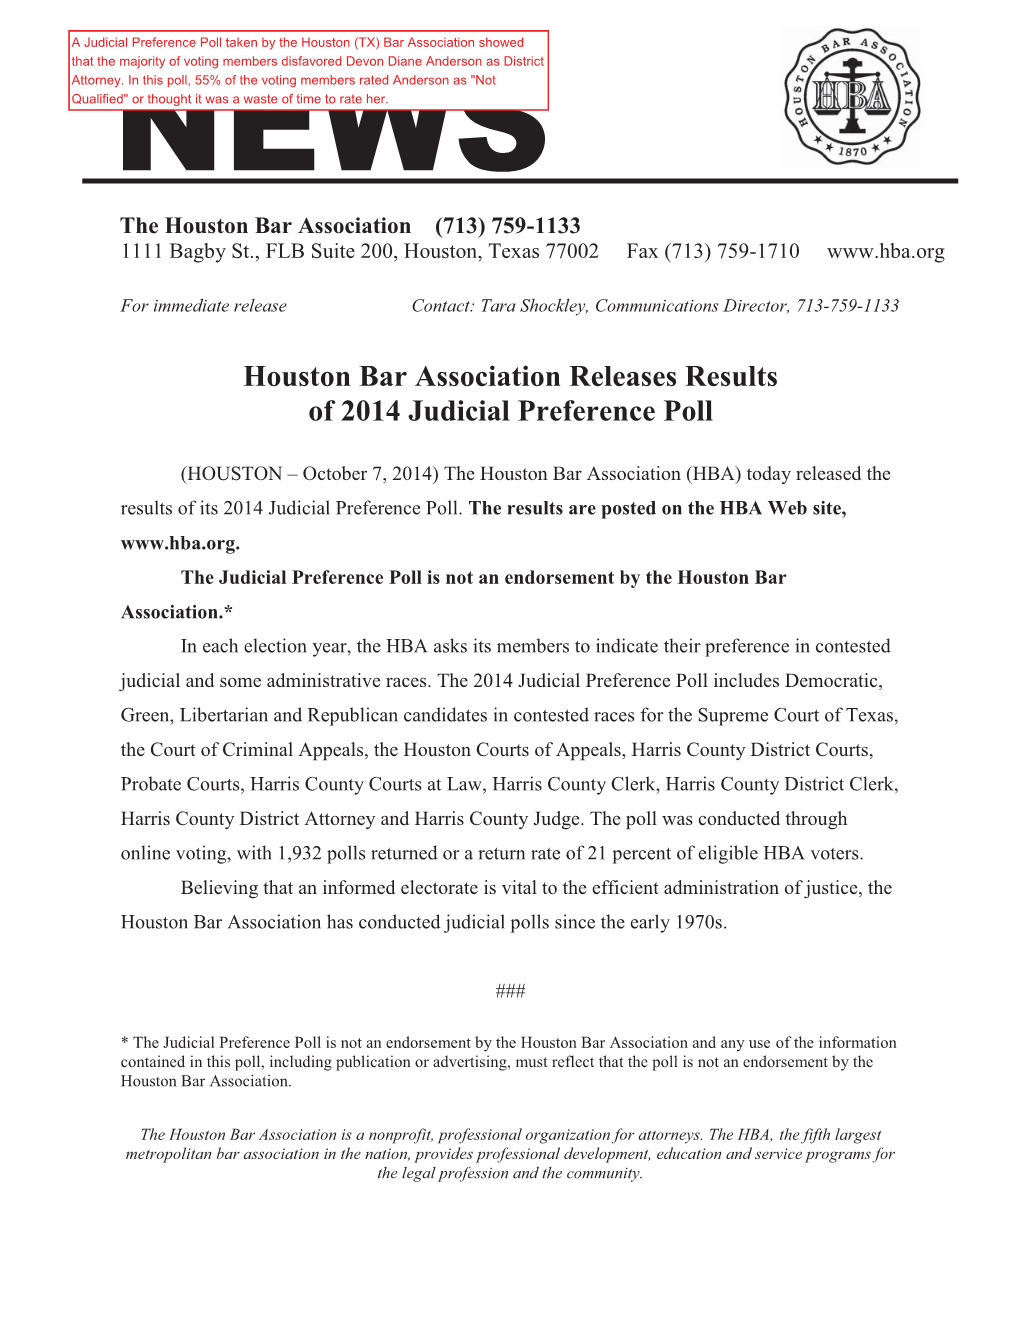 Houston Bar Association Releases Results of 2014 Judicial Preference Poll